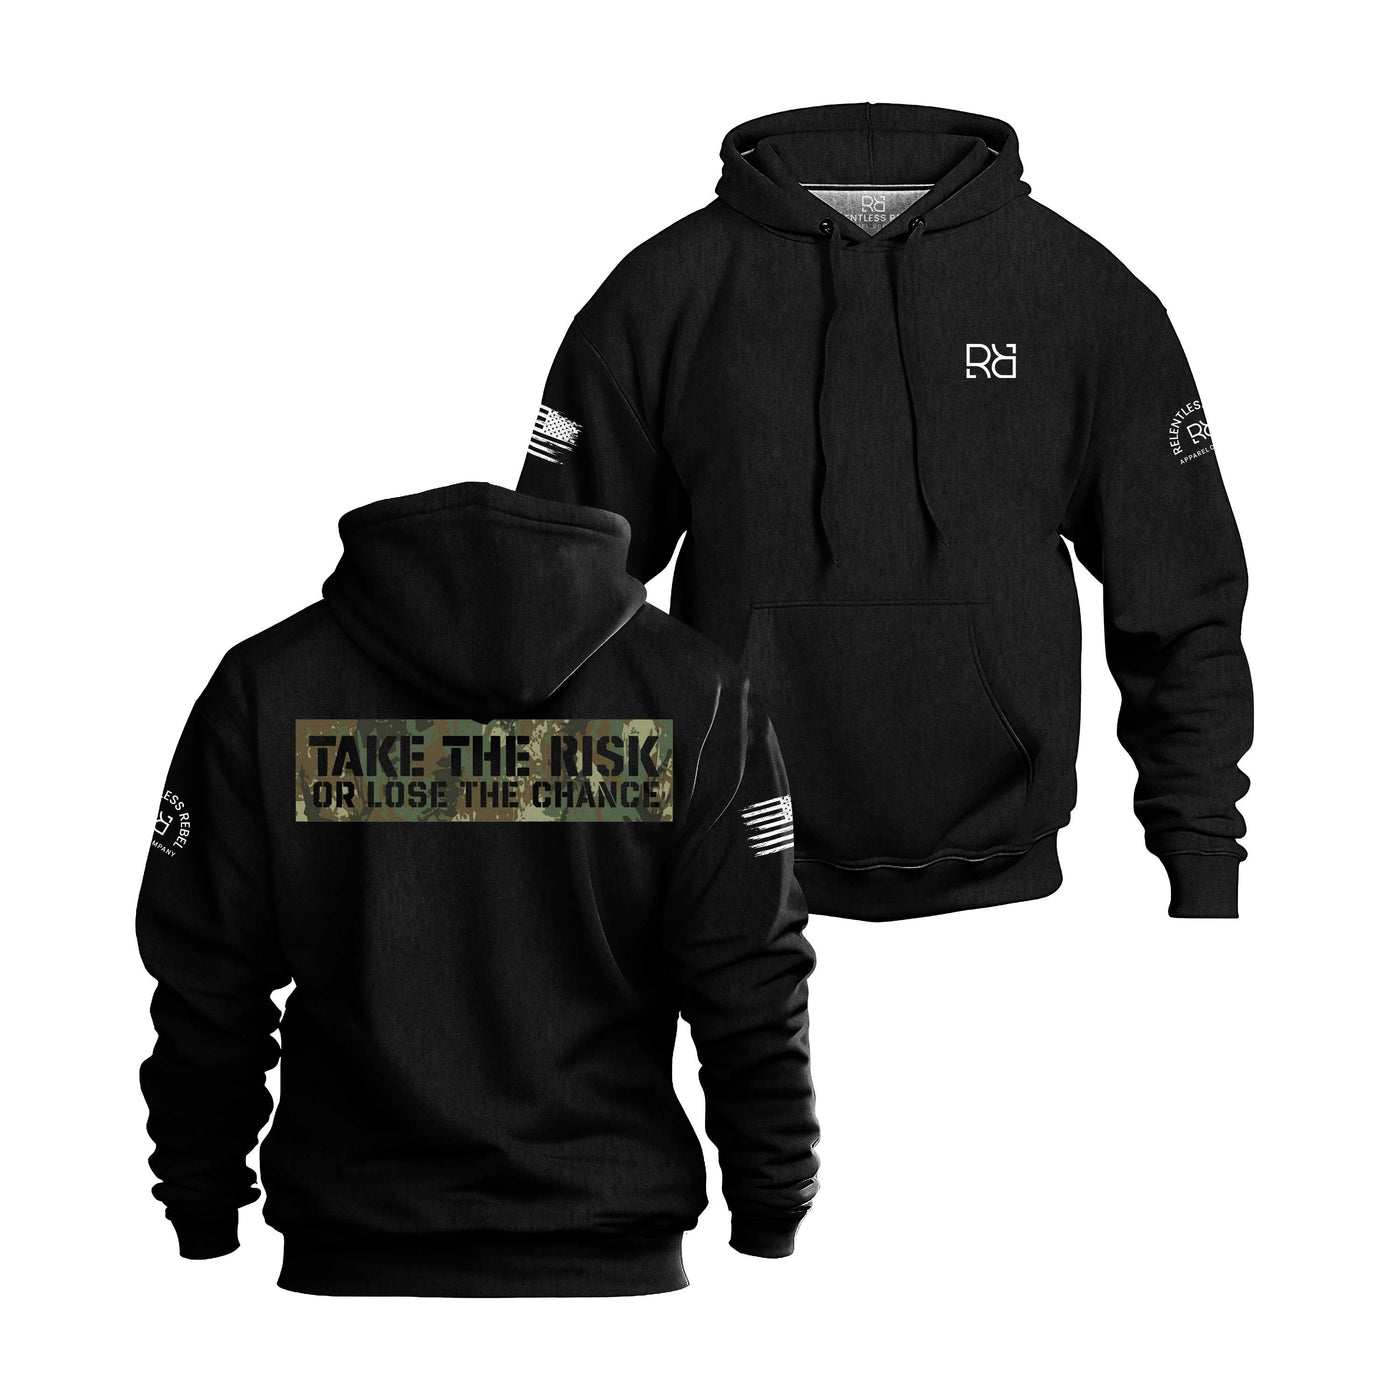 Take the Risk or Lose the Chance | Heavy Weight Men's Hoodie